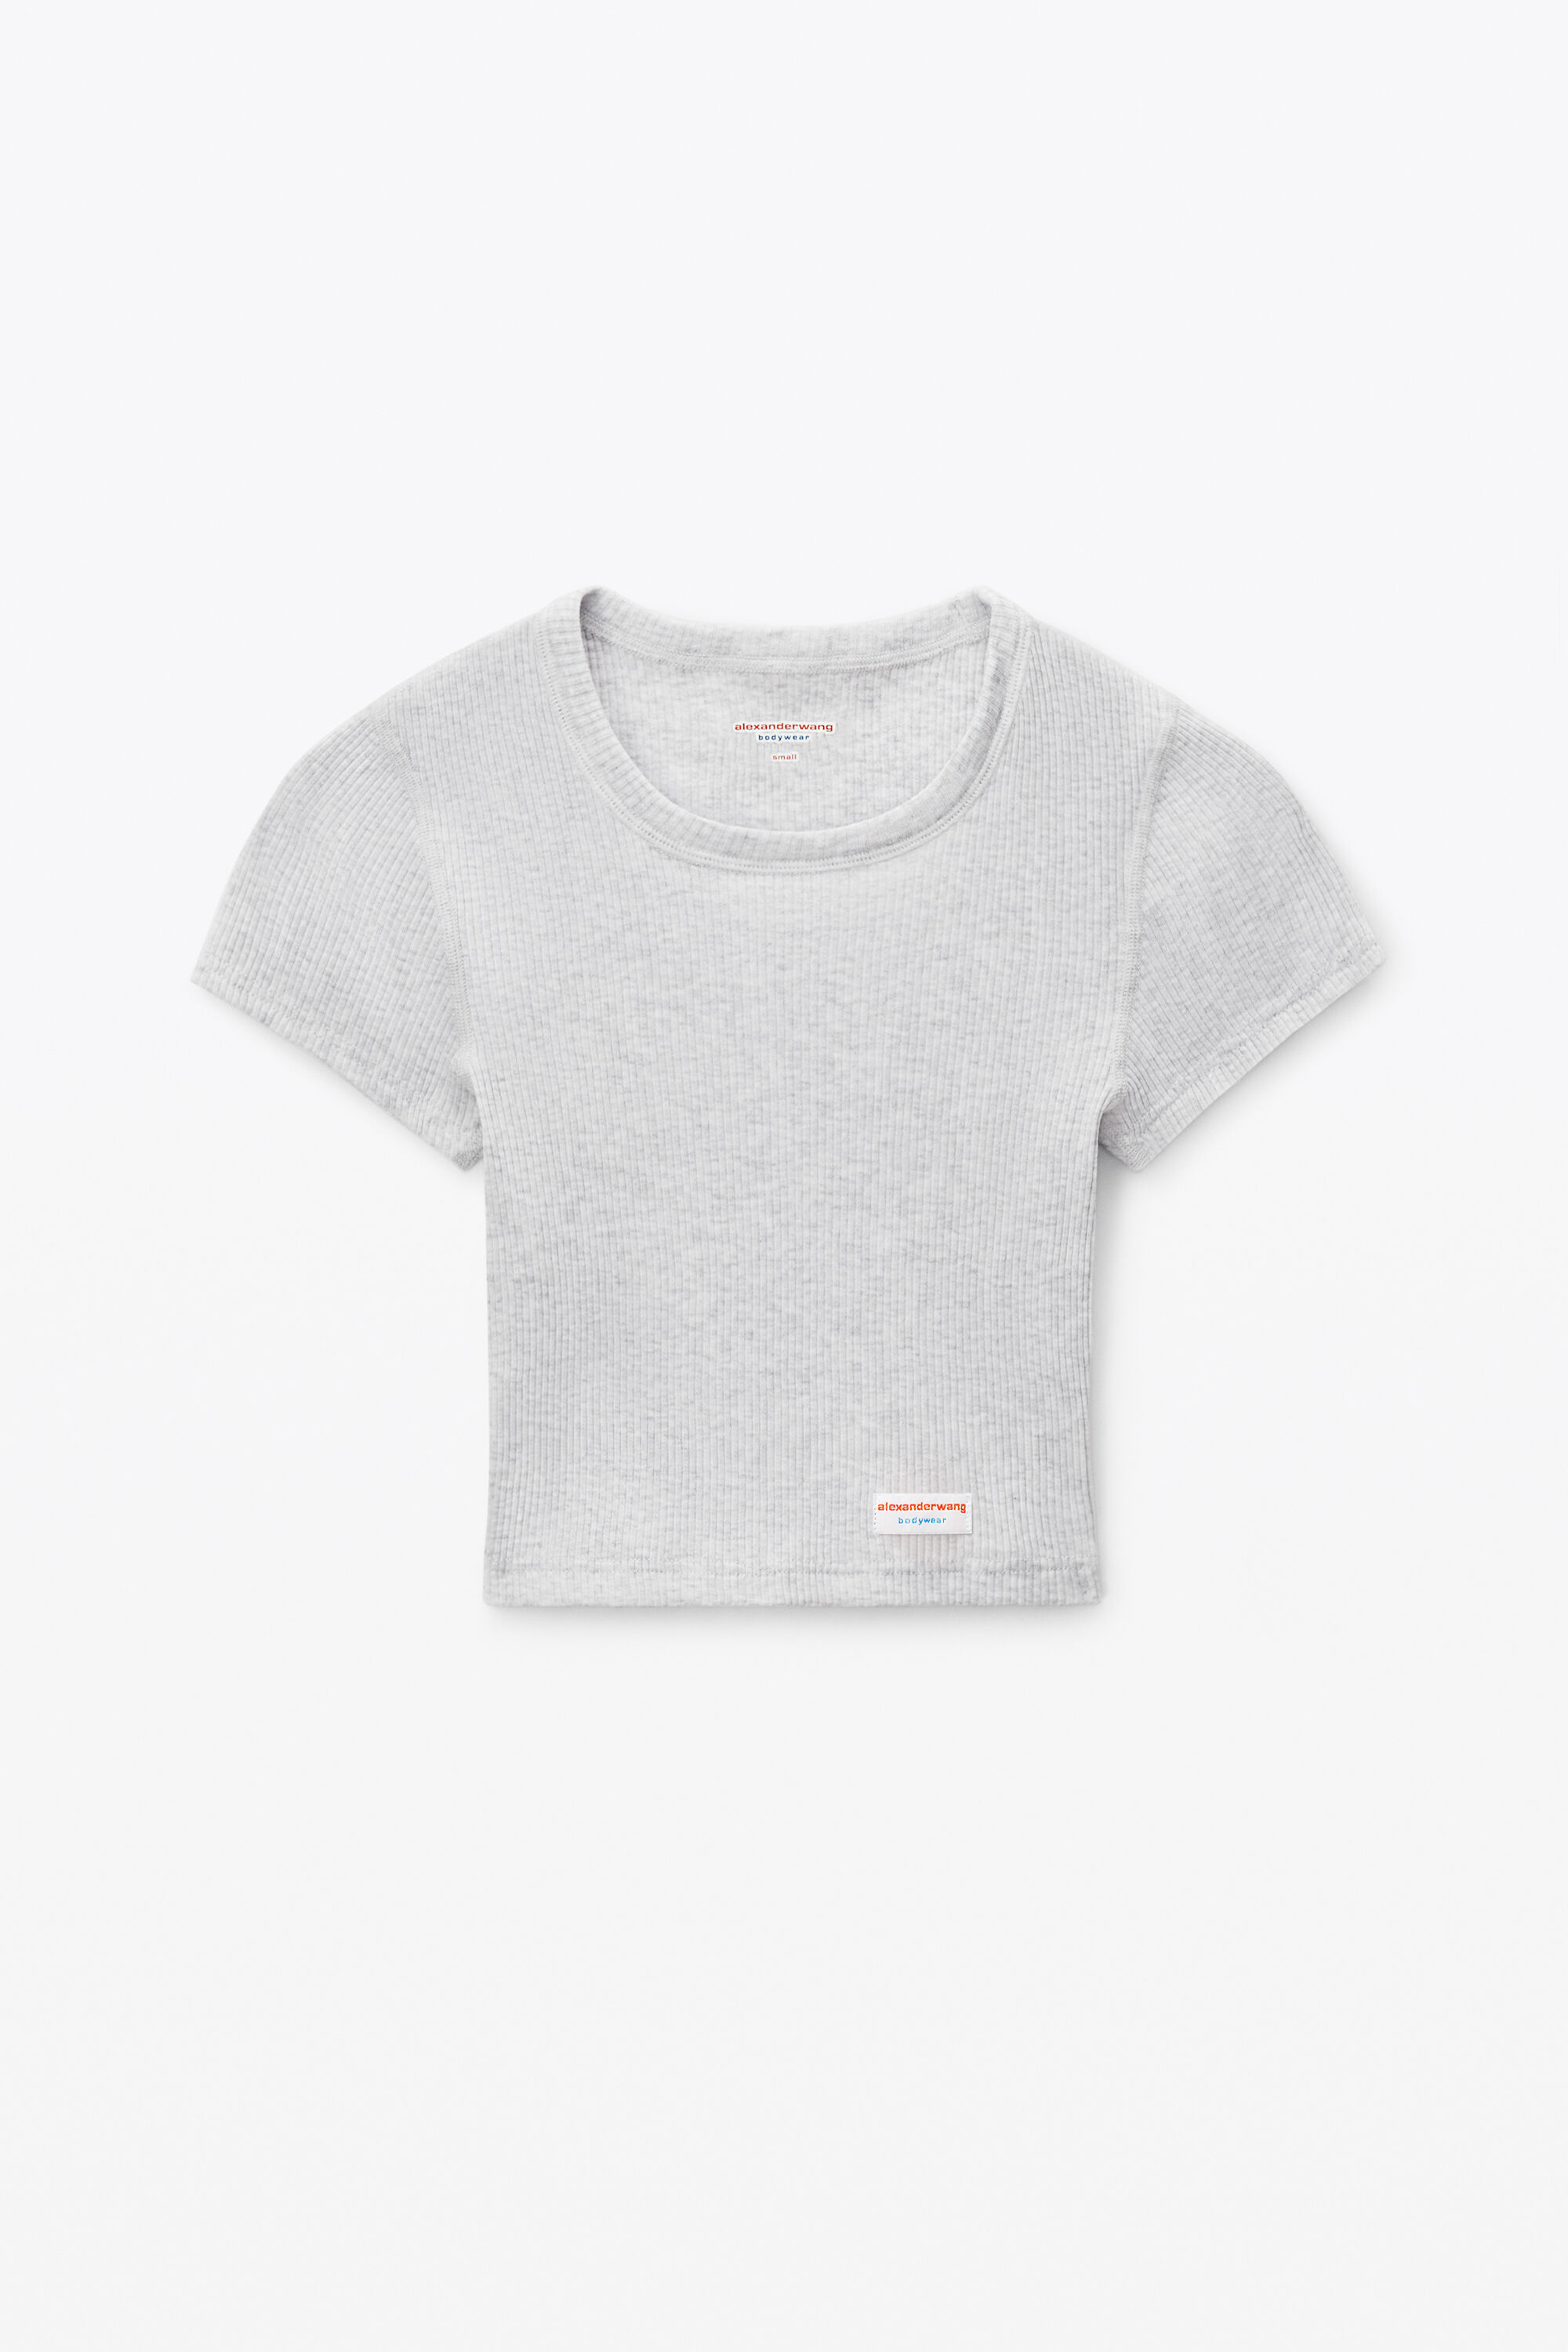 Cropped Short-Sleeve Tee in Ribbed Cotton Jersey in LIGHT HEATHER 